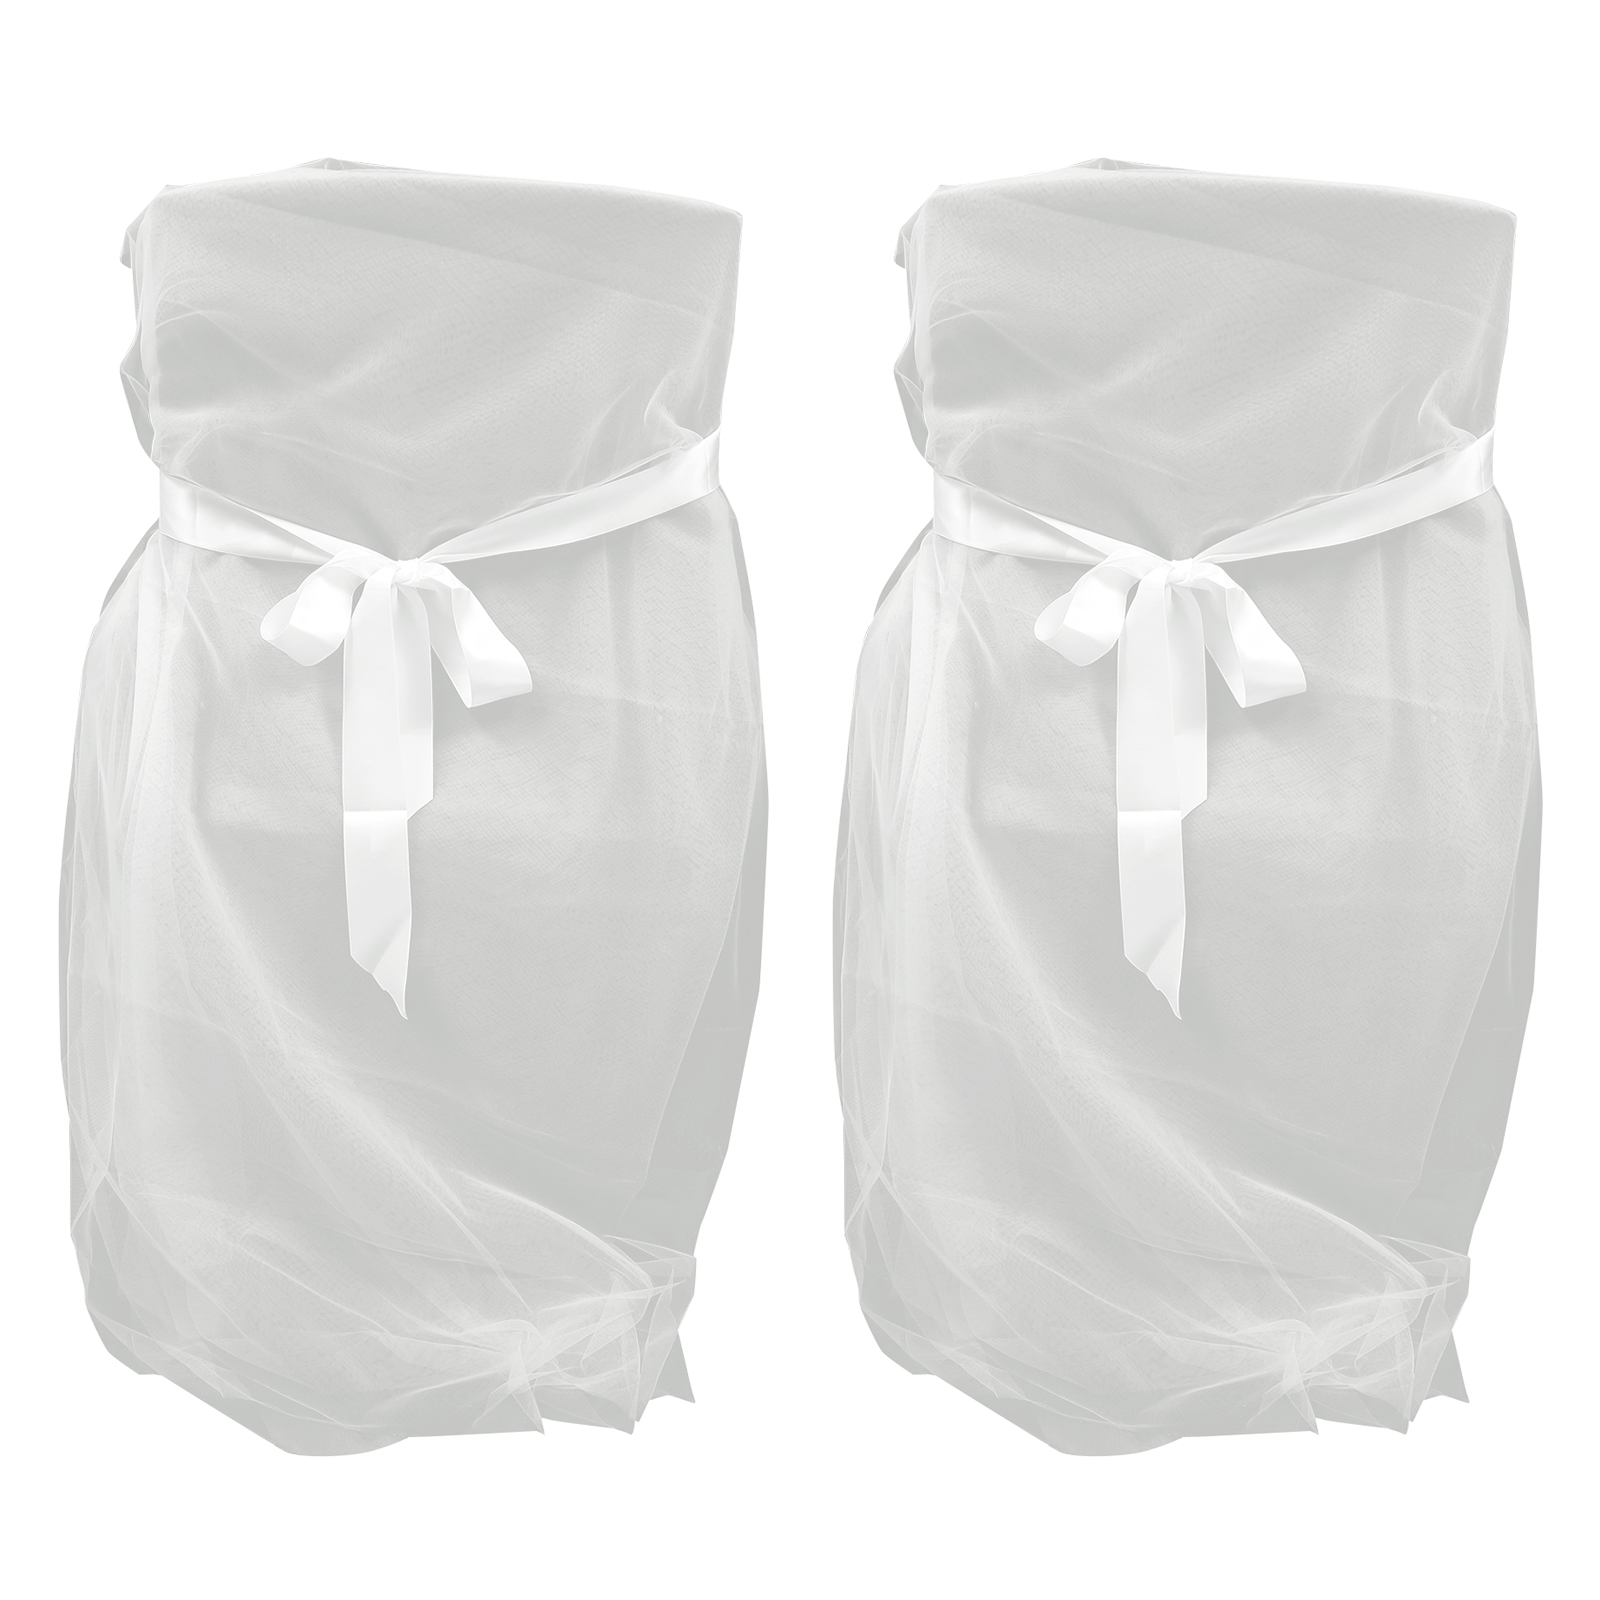 2 Pcs Tulle Chair Cover Long Bow Ties Mesh Fluffy Tutu Chair Skirt Slipcovers for Bridal Shower Wedding Baby Shower Decor (White) - image 1 of 8